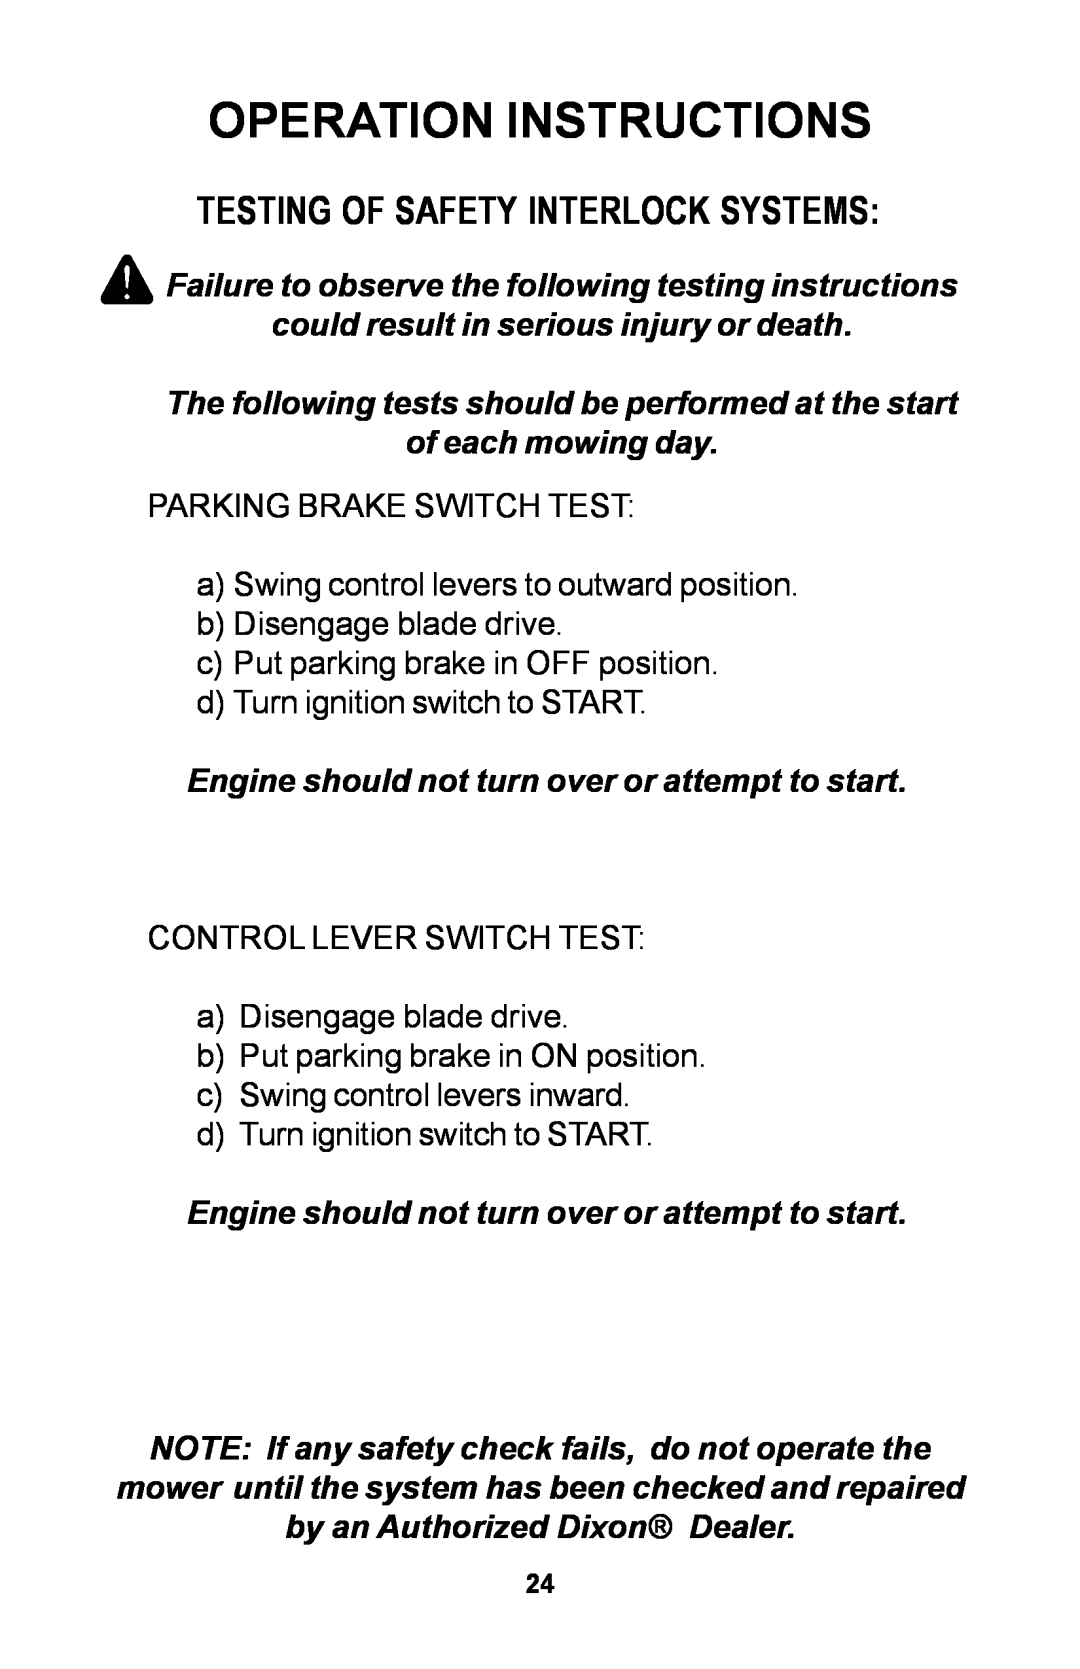 Dixon 30 manual Testing Of Safety Interlock Systems, Operation Instructions 